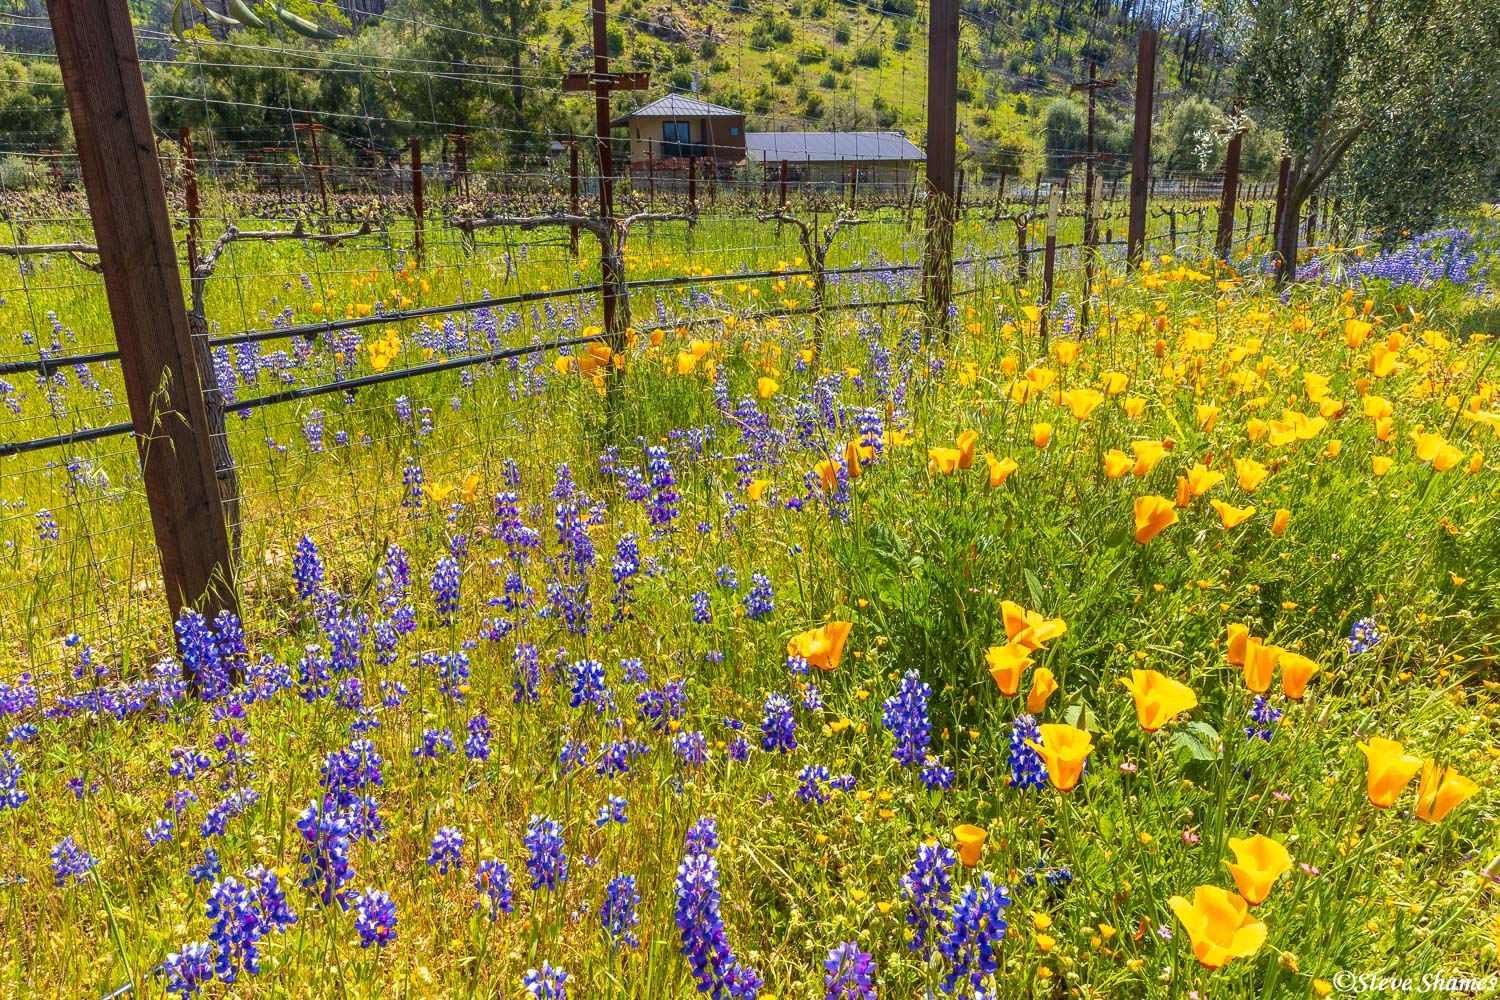 My favorite wildflowers, poppies and lupines!